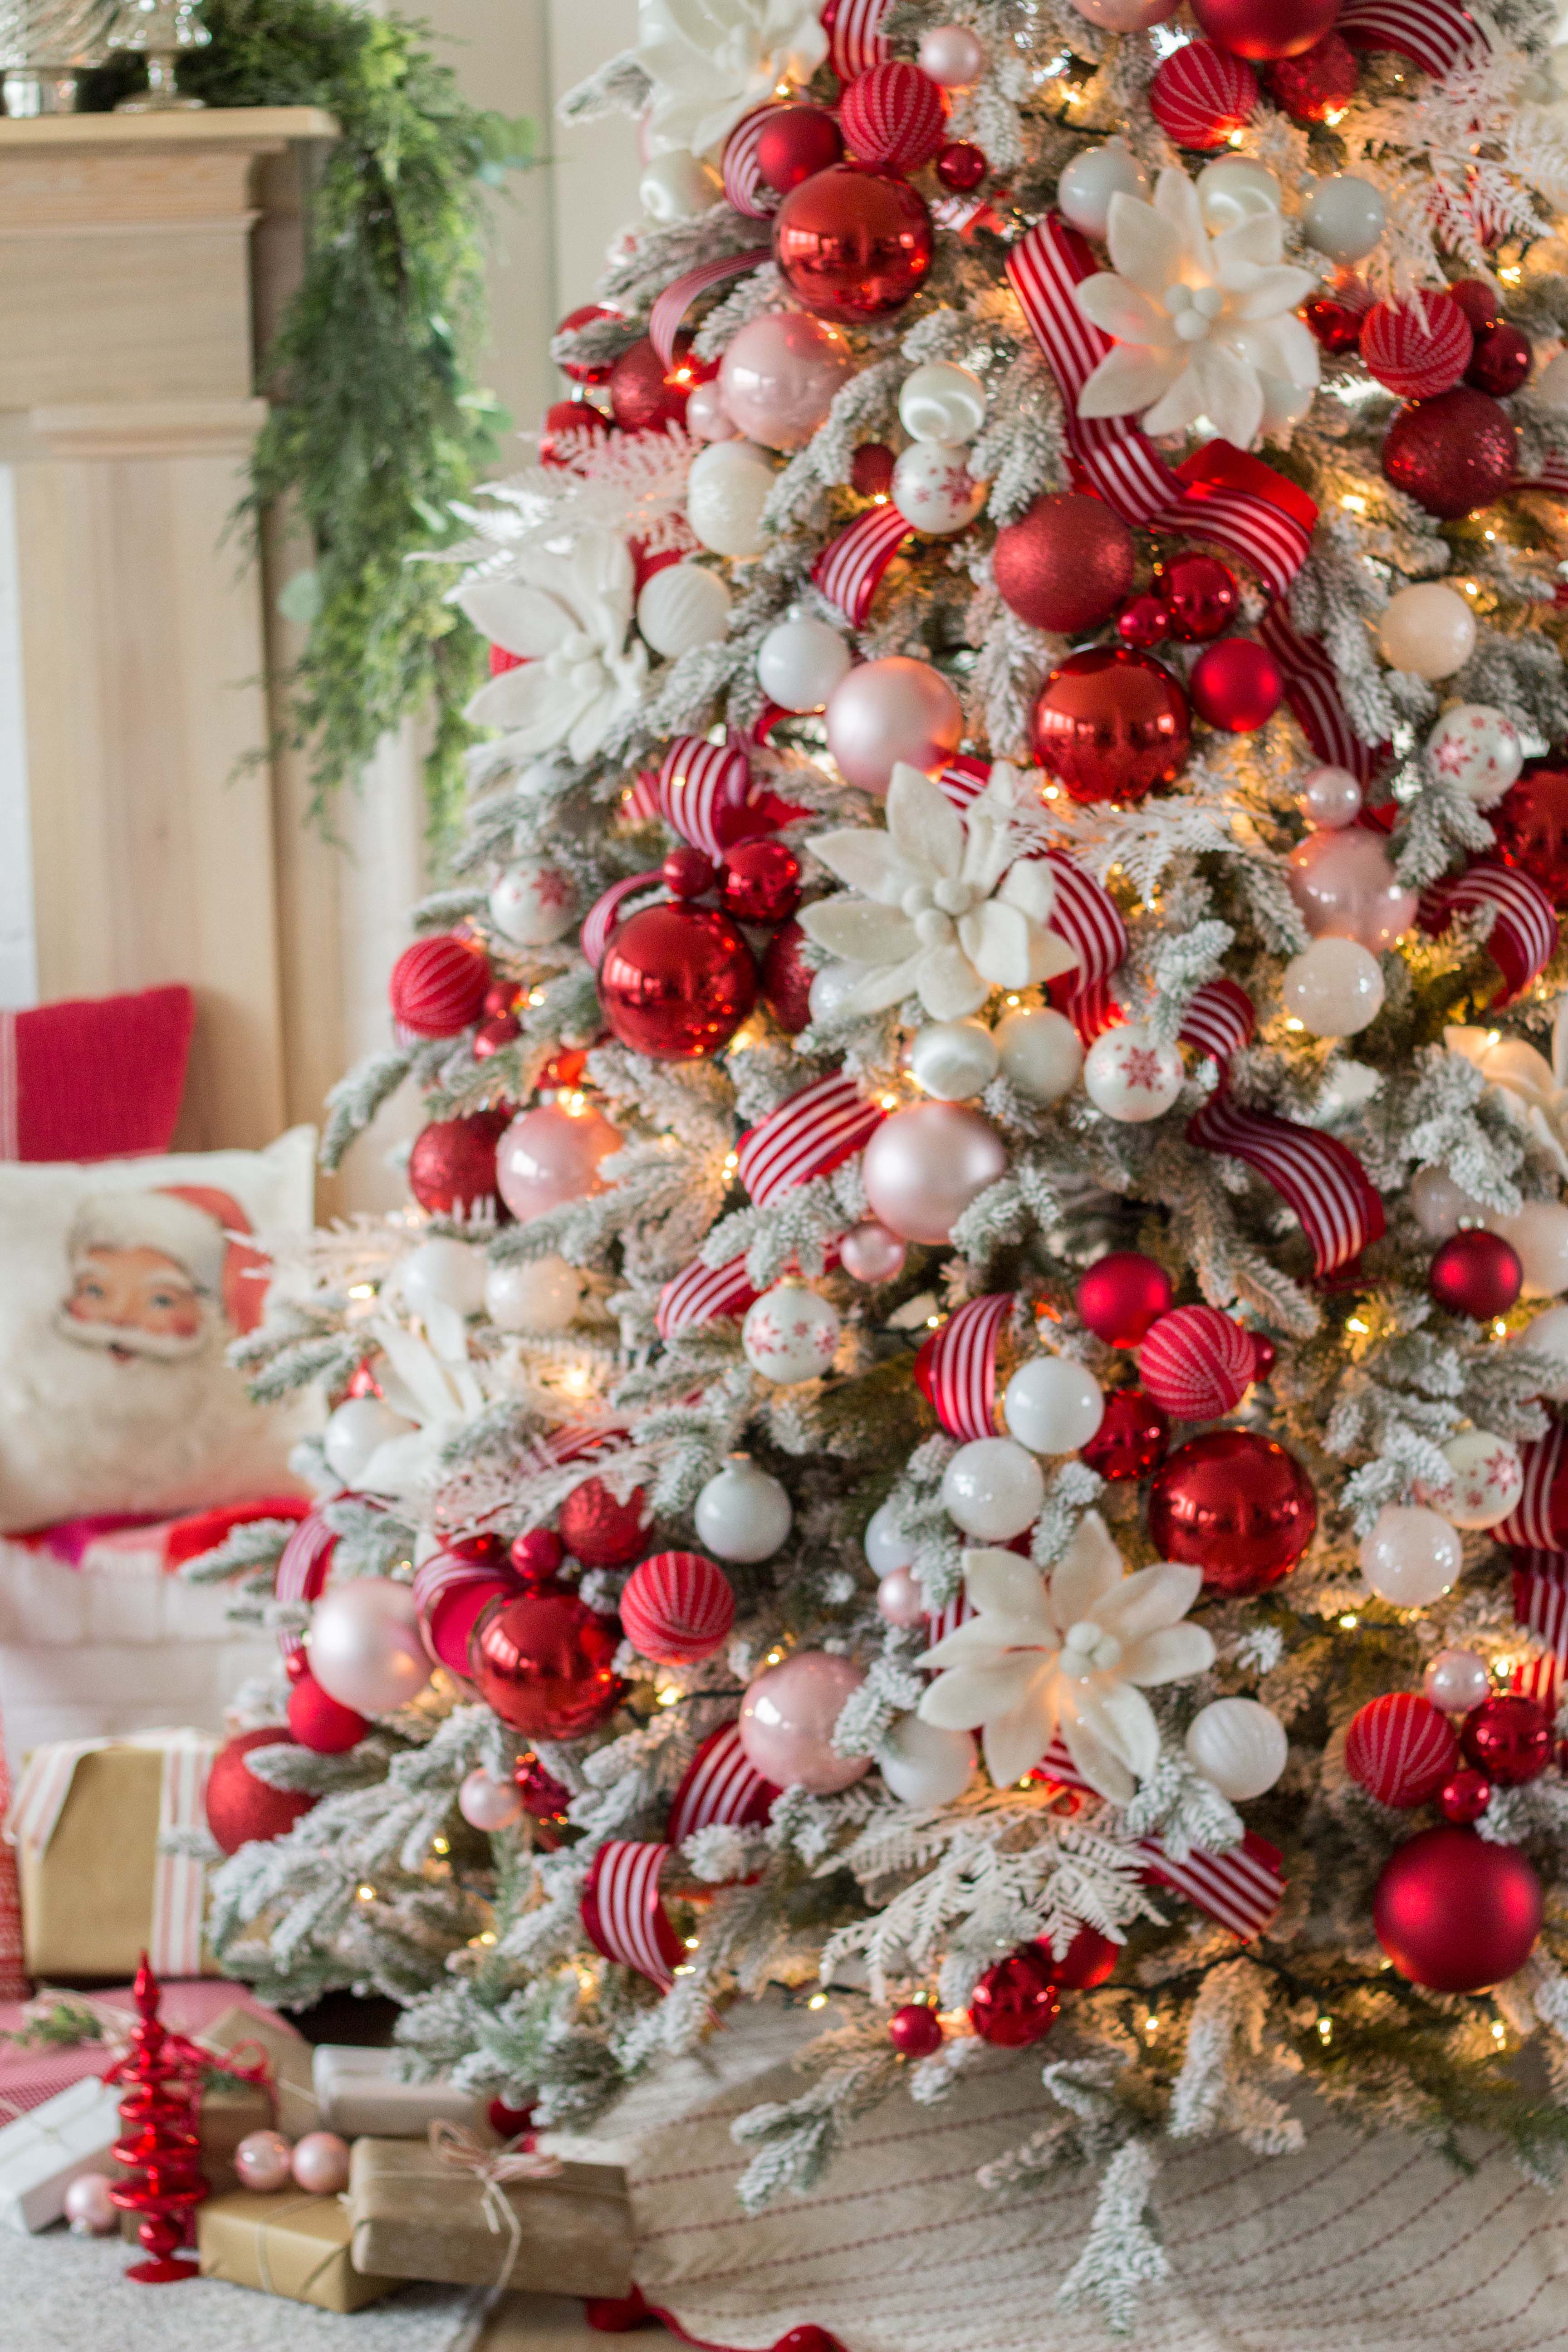 Red and White Christmas Tree - Decorating Ideas  Christmas tree, White christmas  tree decorations, Christmas tree decorating themes